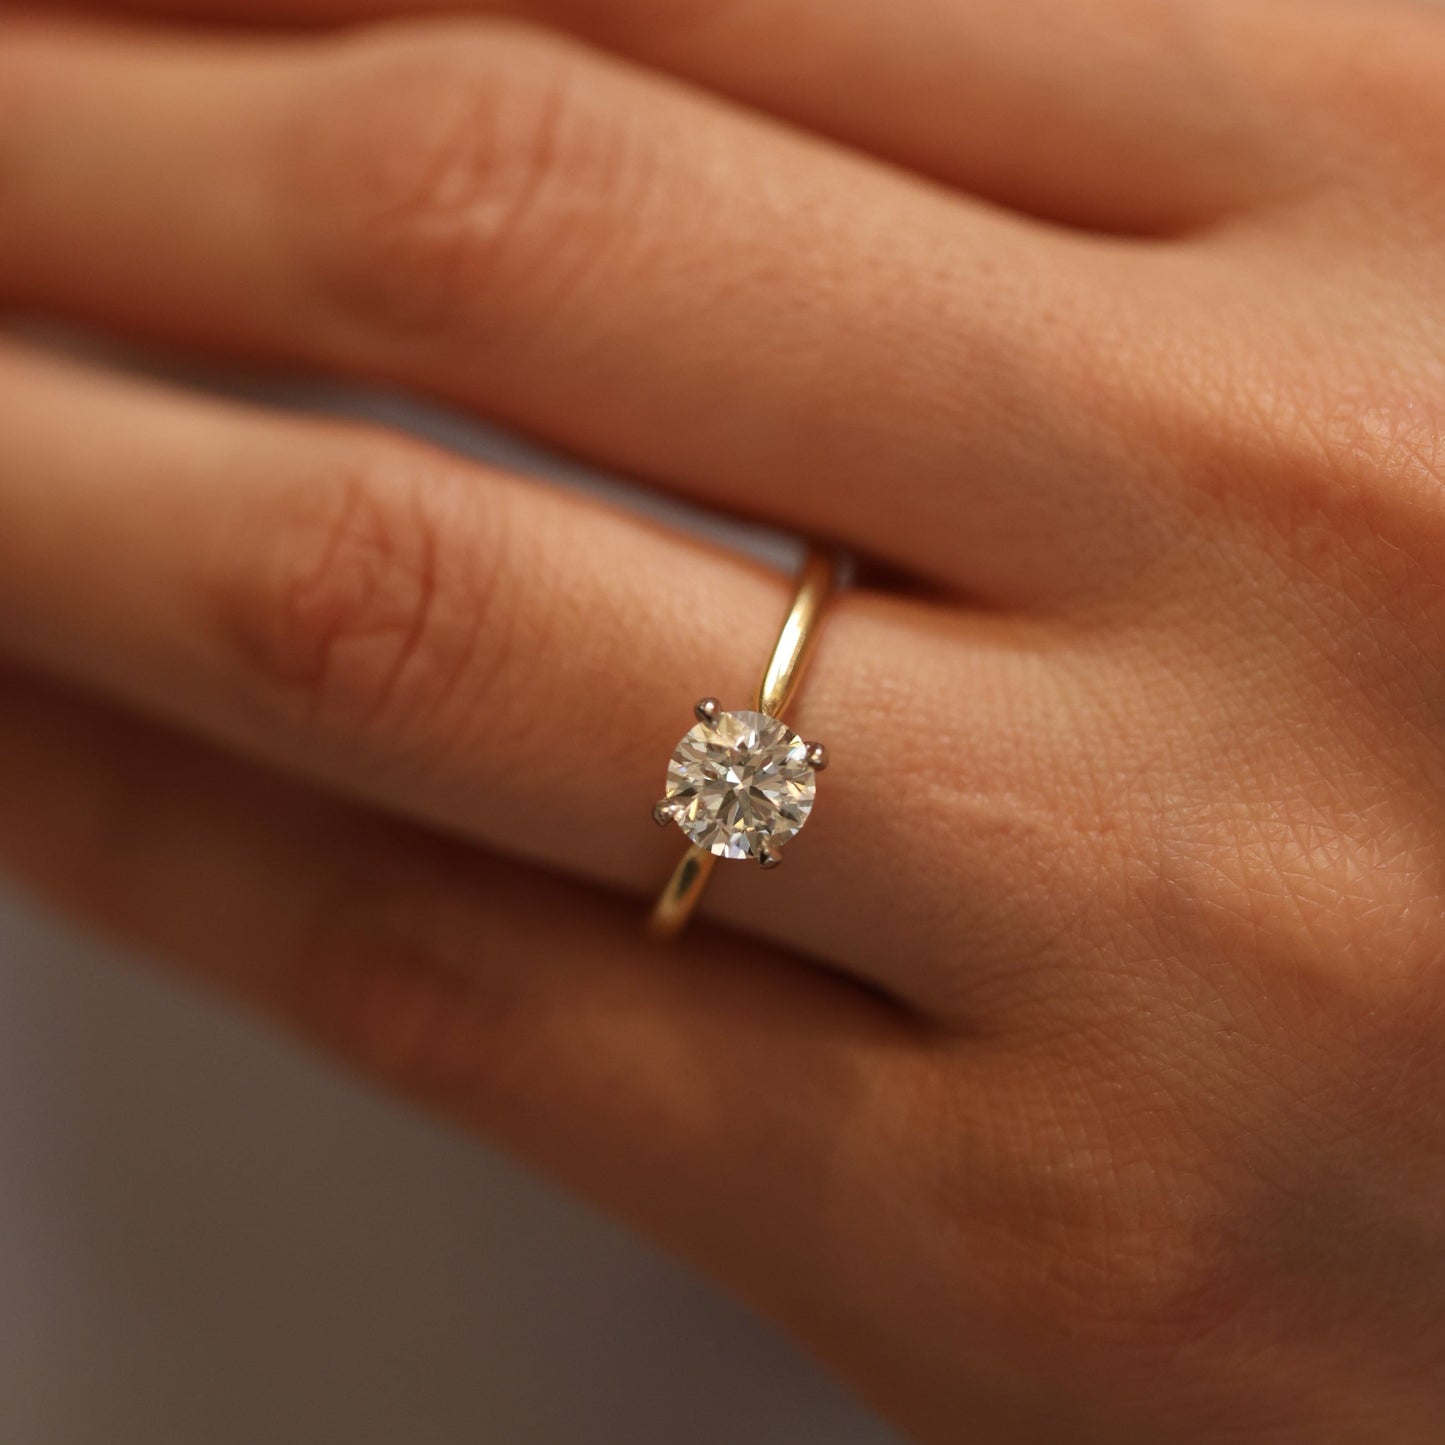 J'adore Solitaire Ring - 1.01ct